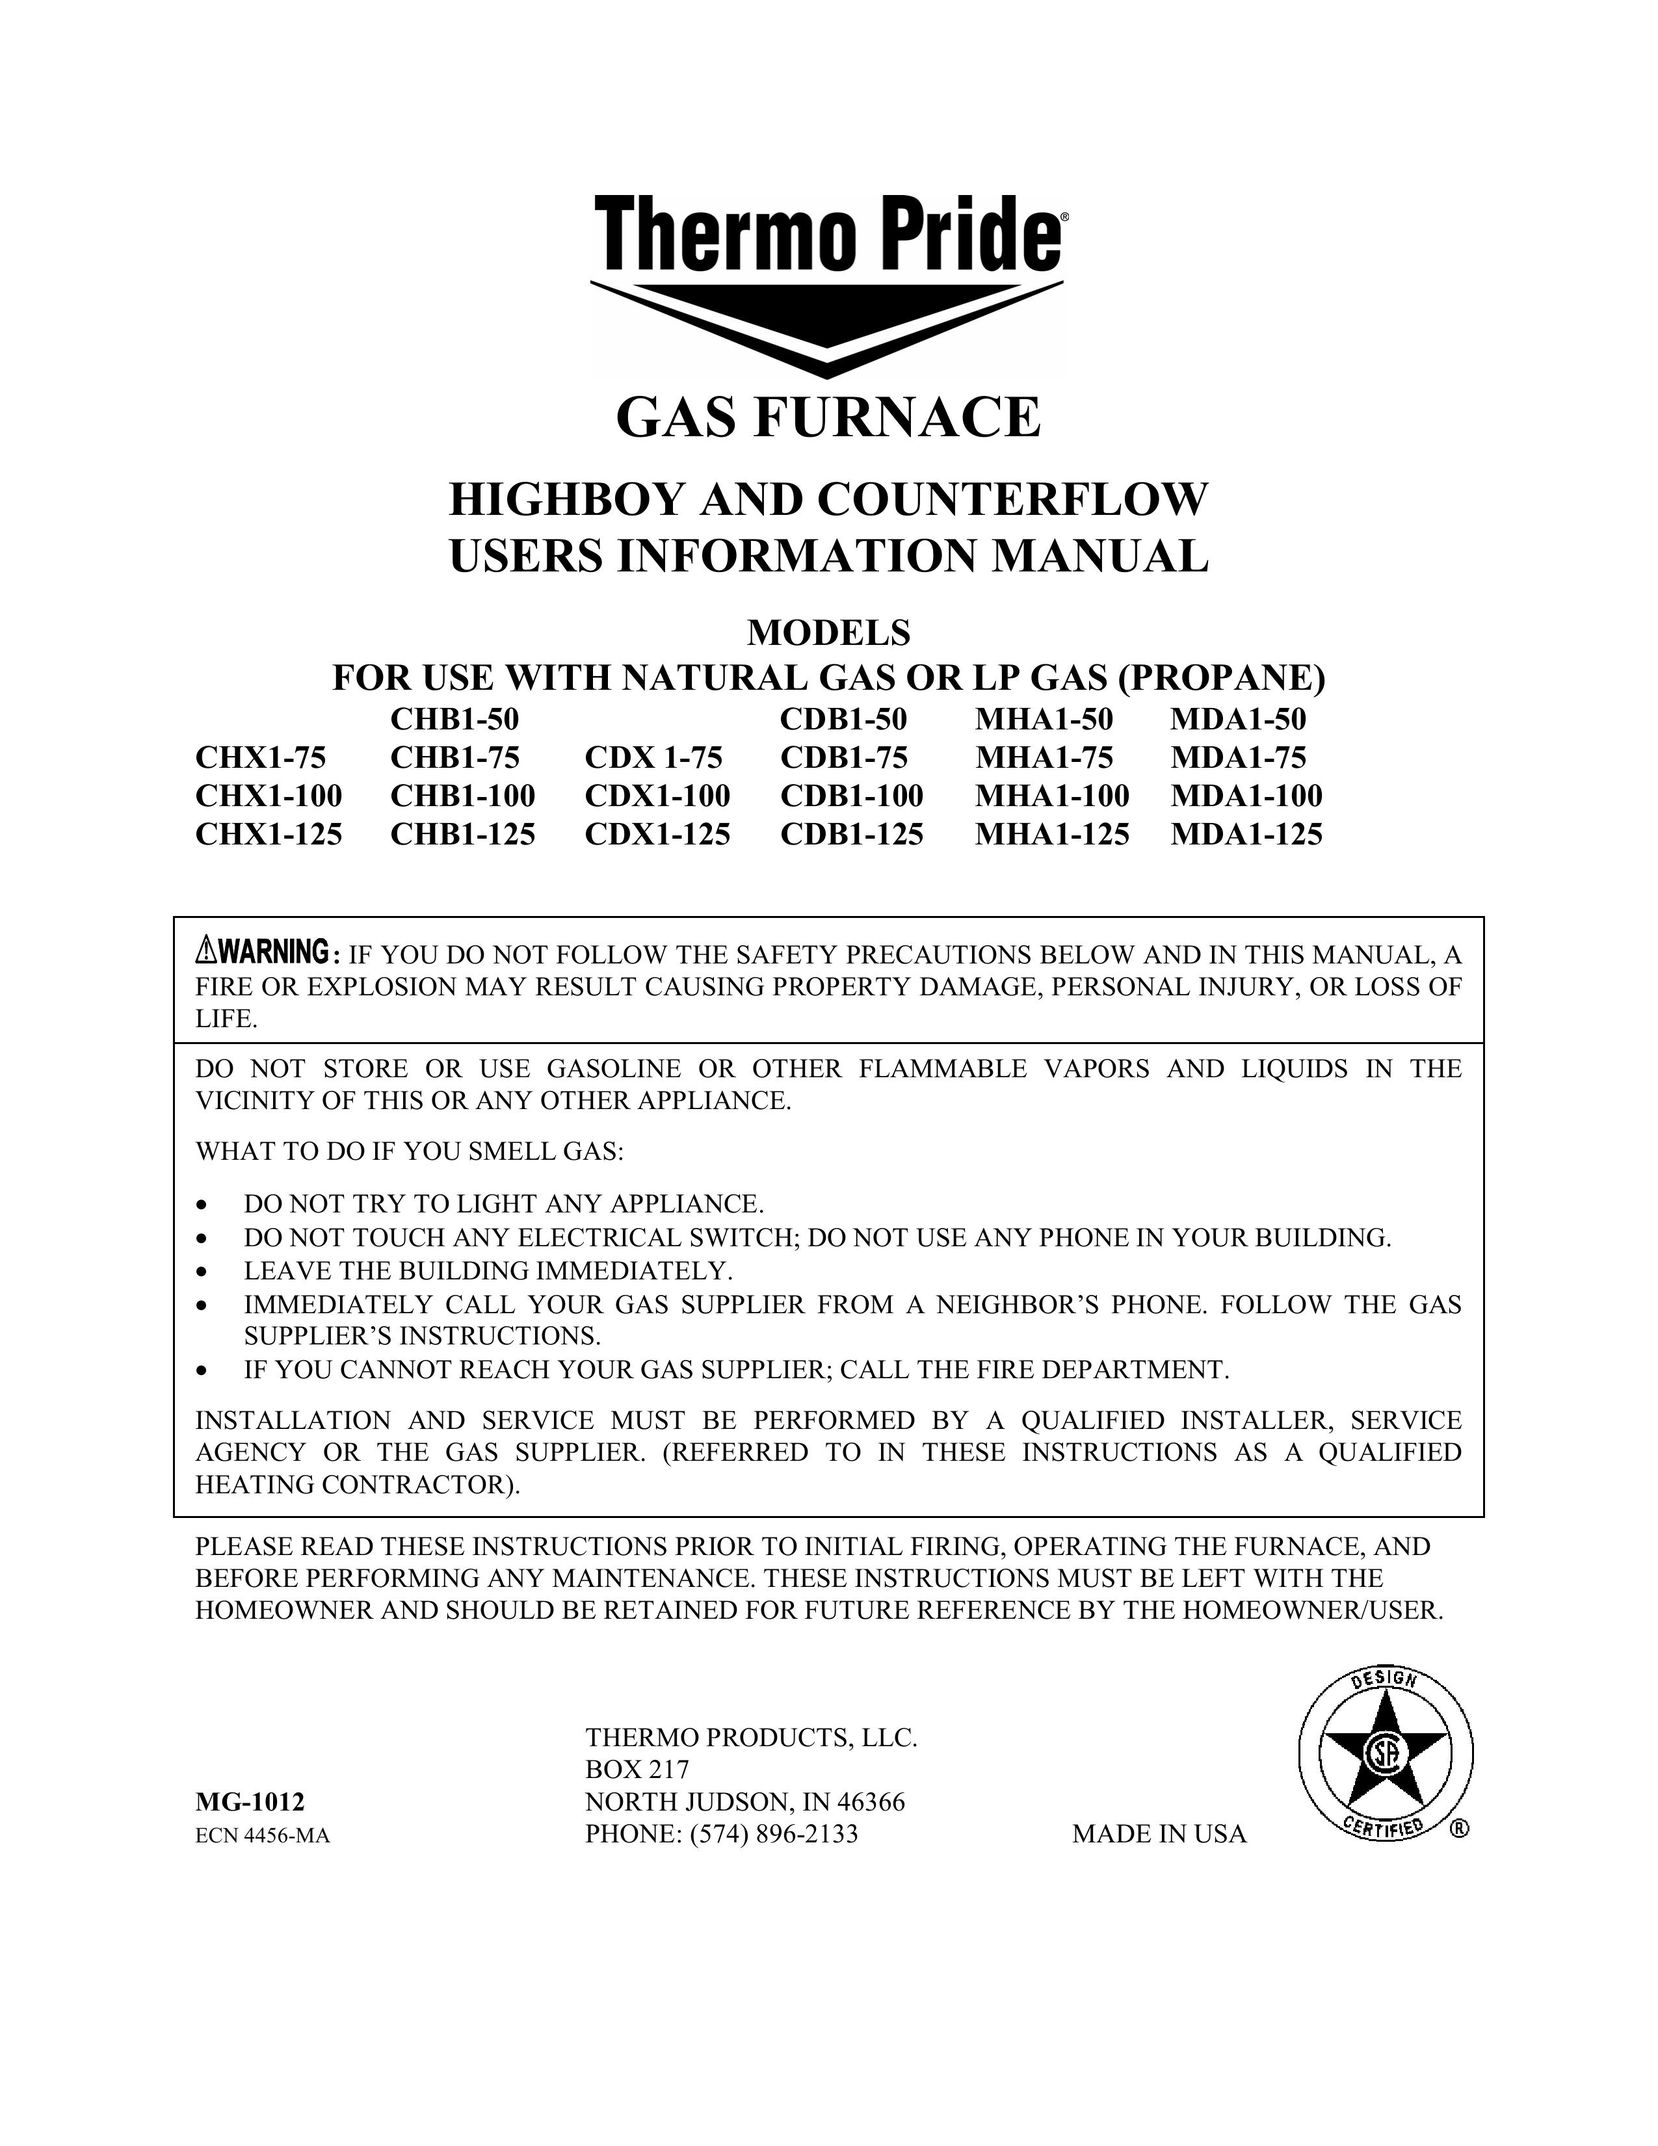 Thermo Products CDX1-75 Furnace User Manual